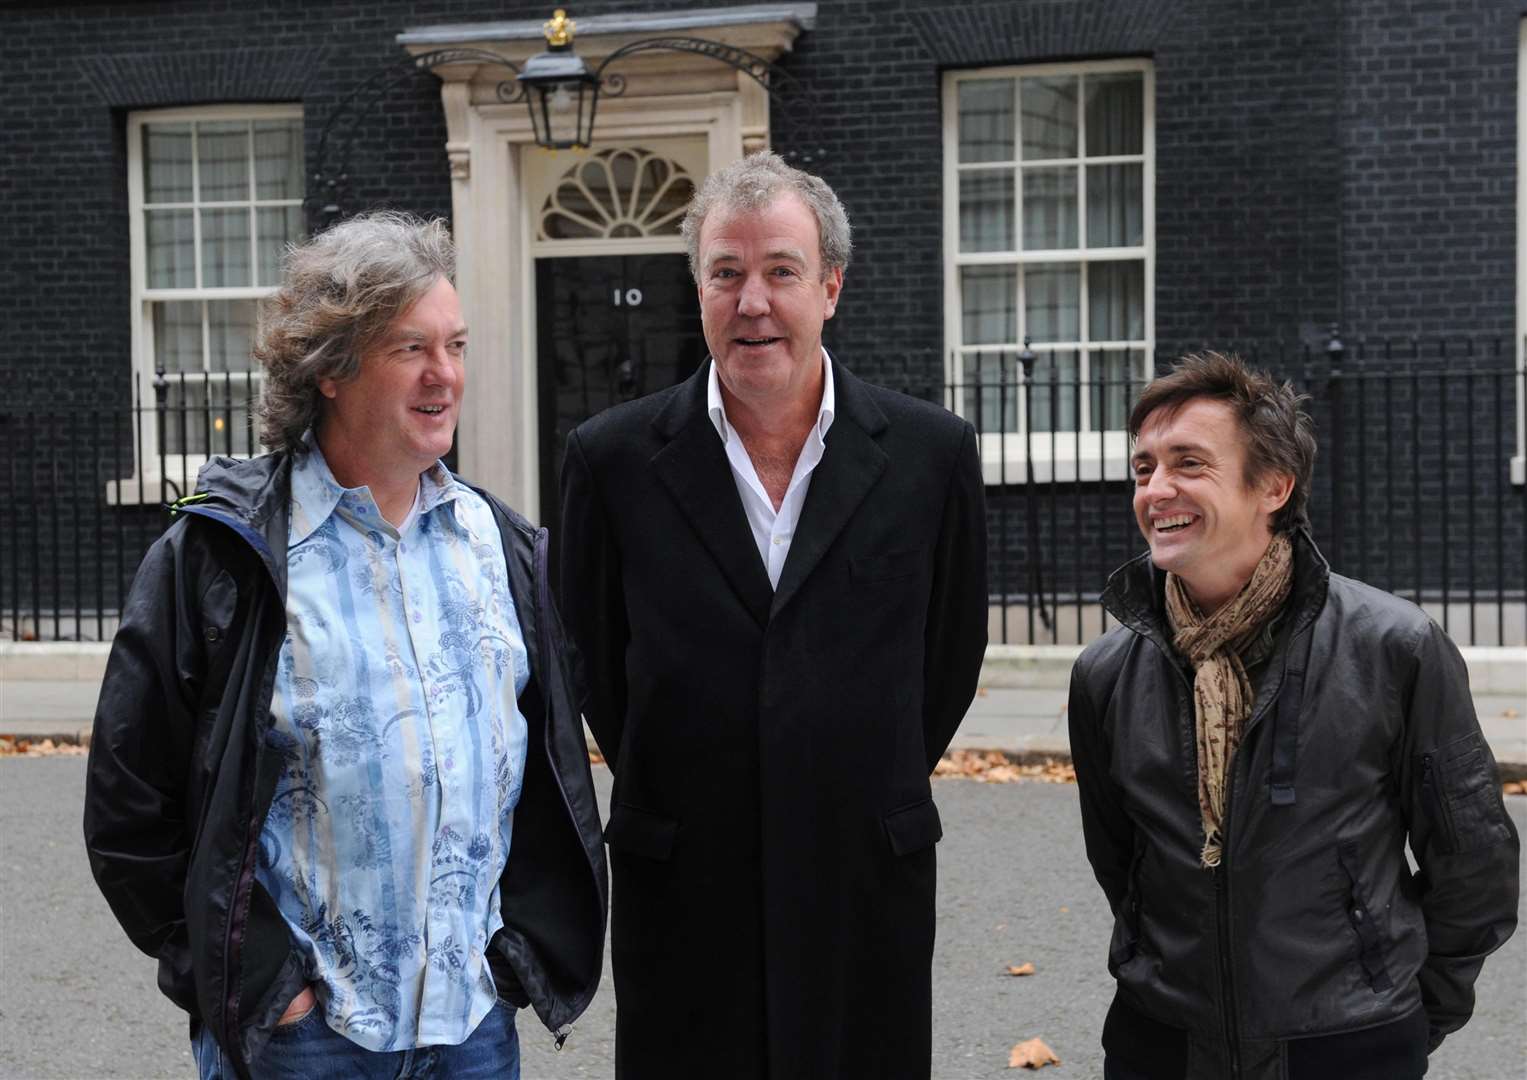 Jeremy Clarkson was involved in a number of controversies during his time on Top Gear (Stefan Rousseau/PA)